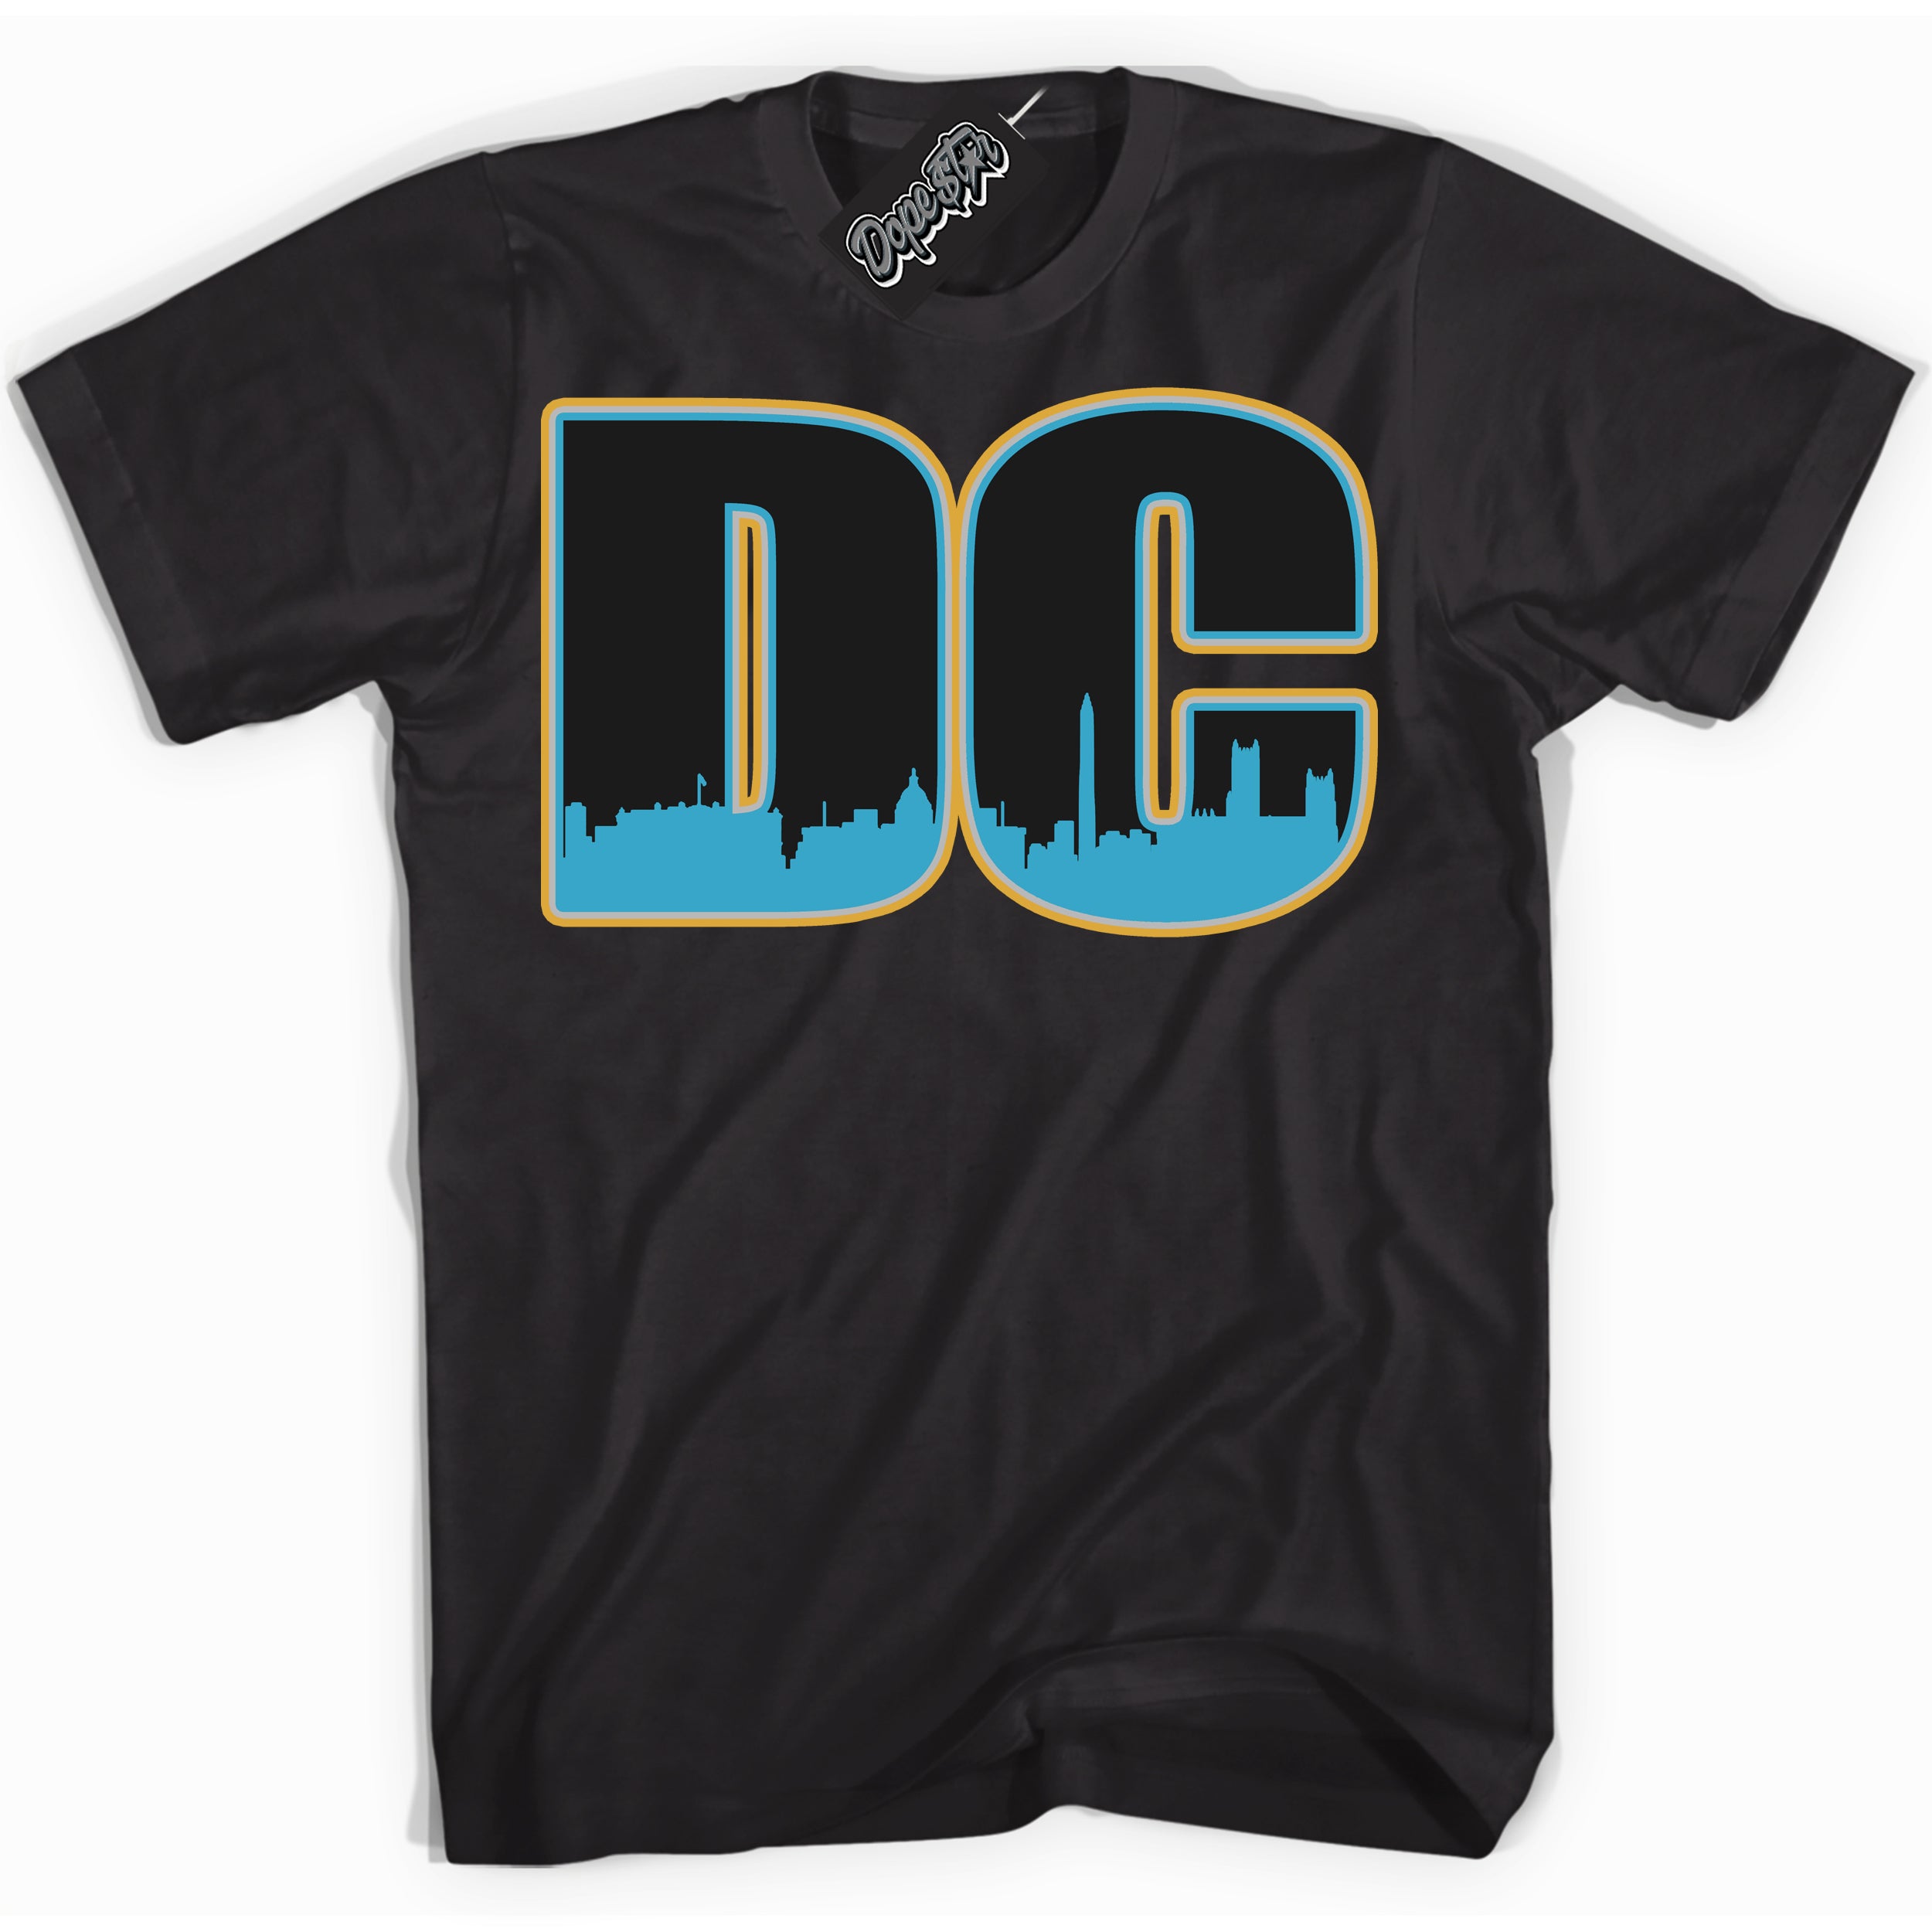 Cool Black Shirt with “ DC” design that perfectly matches Aqua 5s Sneakers.